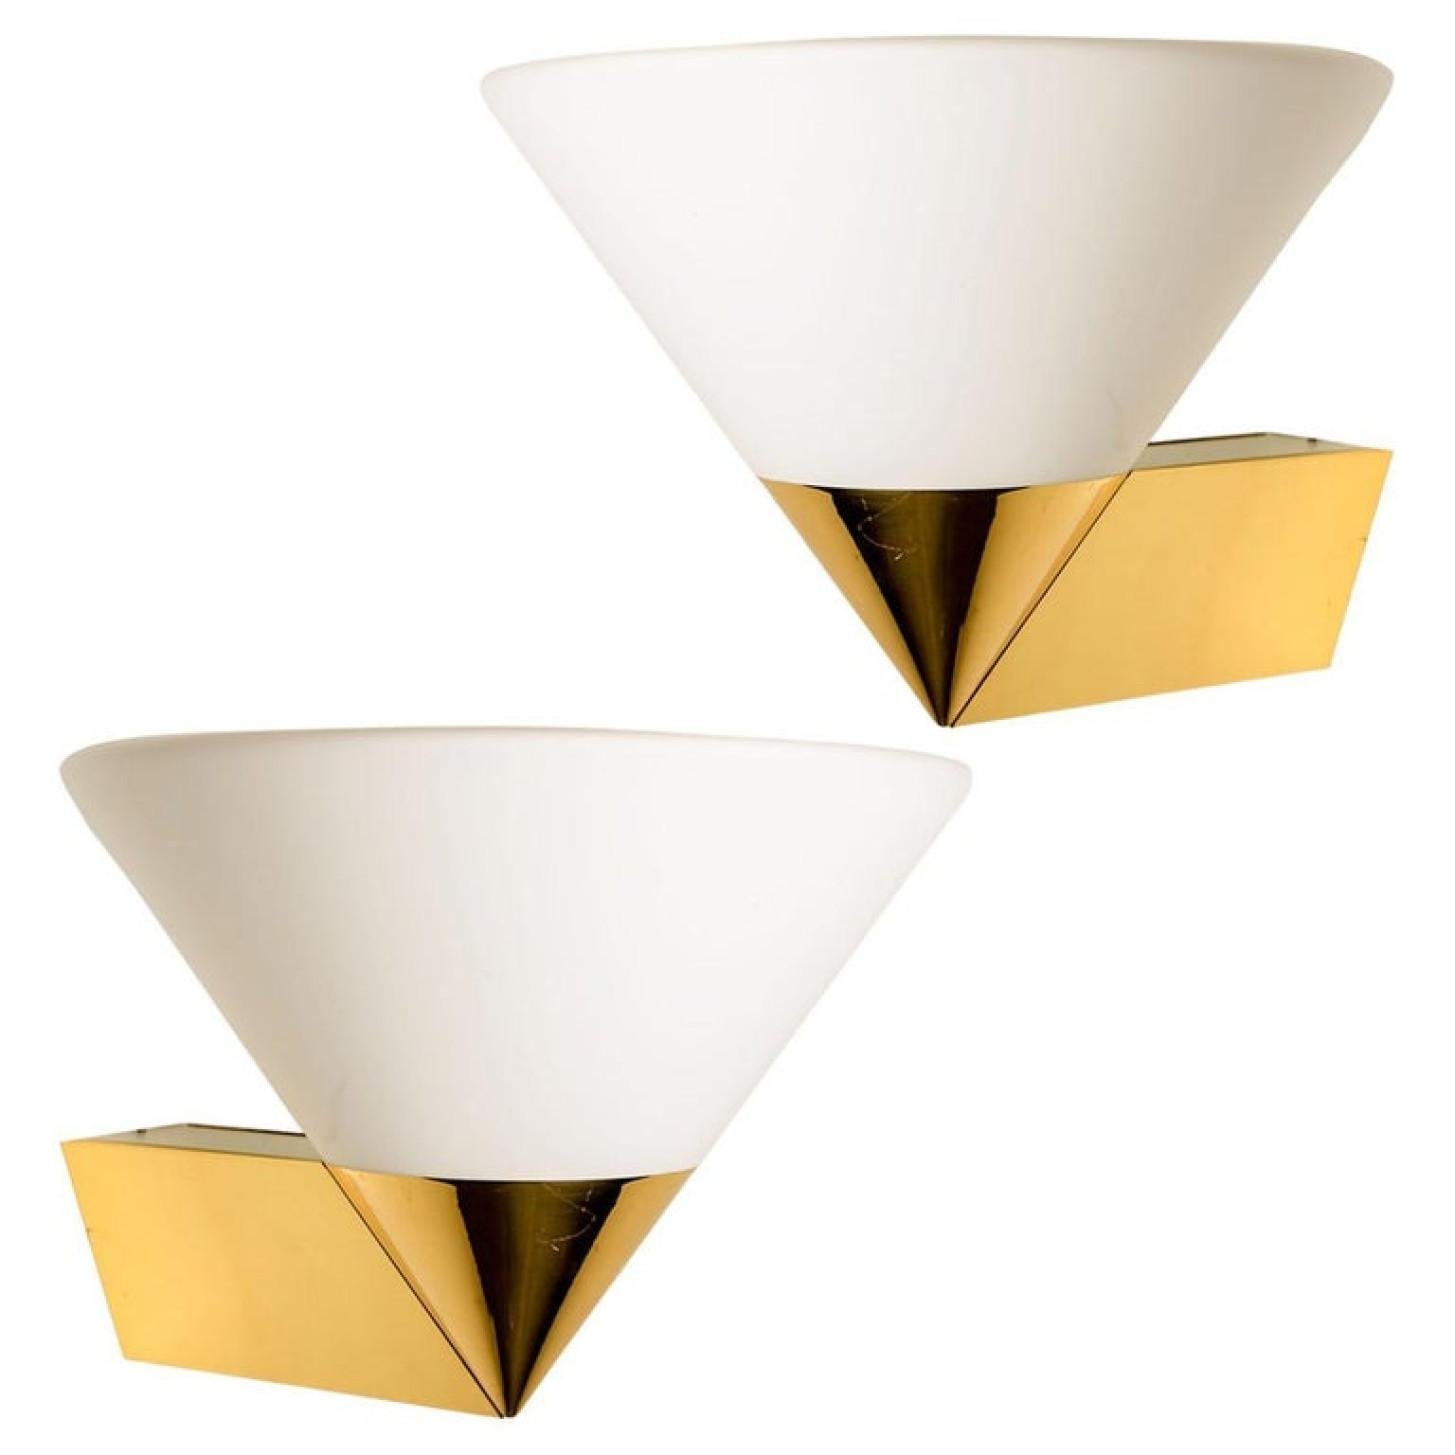 1 of the 4 Pairs Mid-Century Modern wall lamps by Glashütte Limburg made in Germany in the 1970s. They have a beautiful cone shape and are made of solid brass and opaline glass. The the inside is metal.

Dimensions Height: 15.4 in. (39 cm) Width: